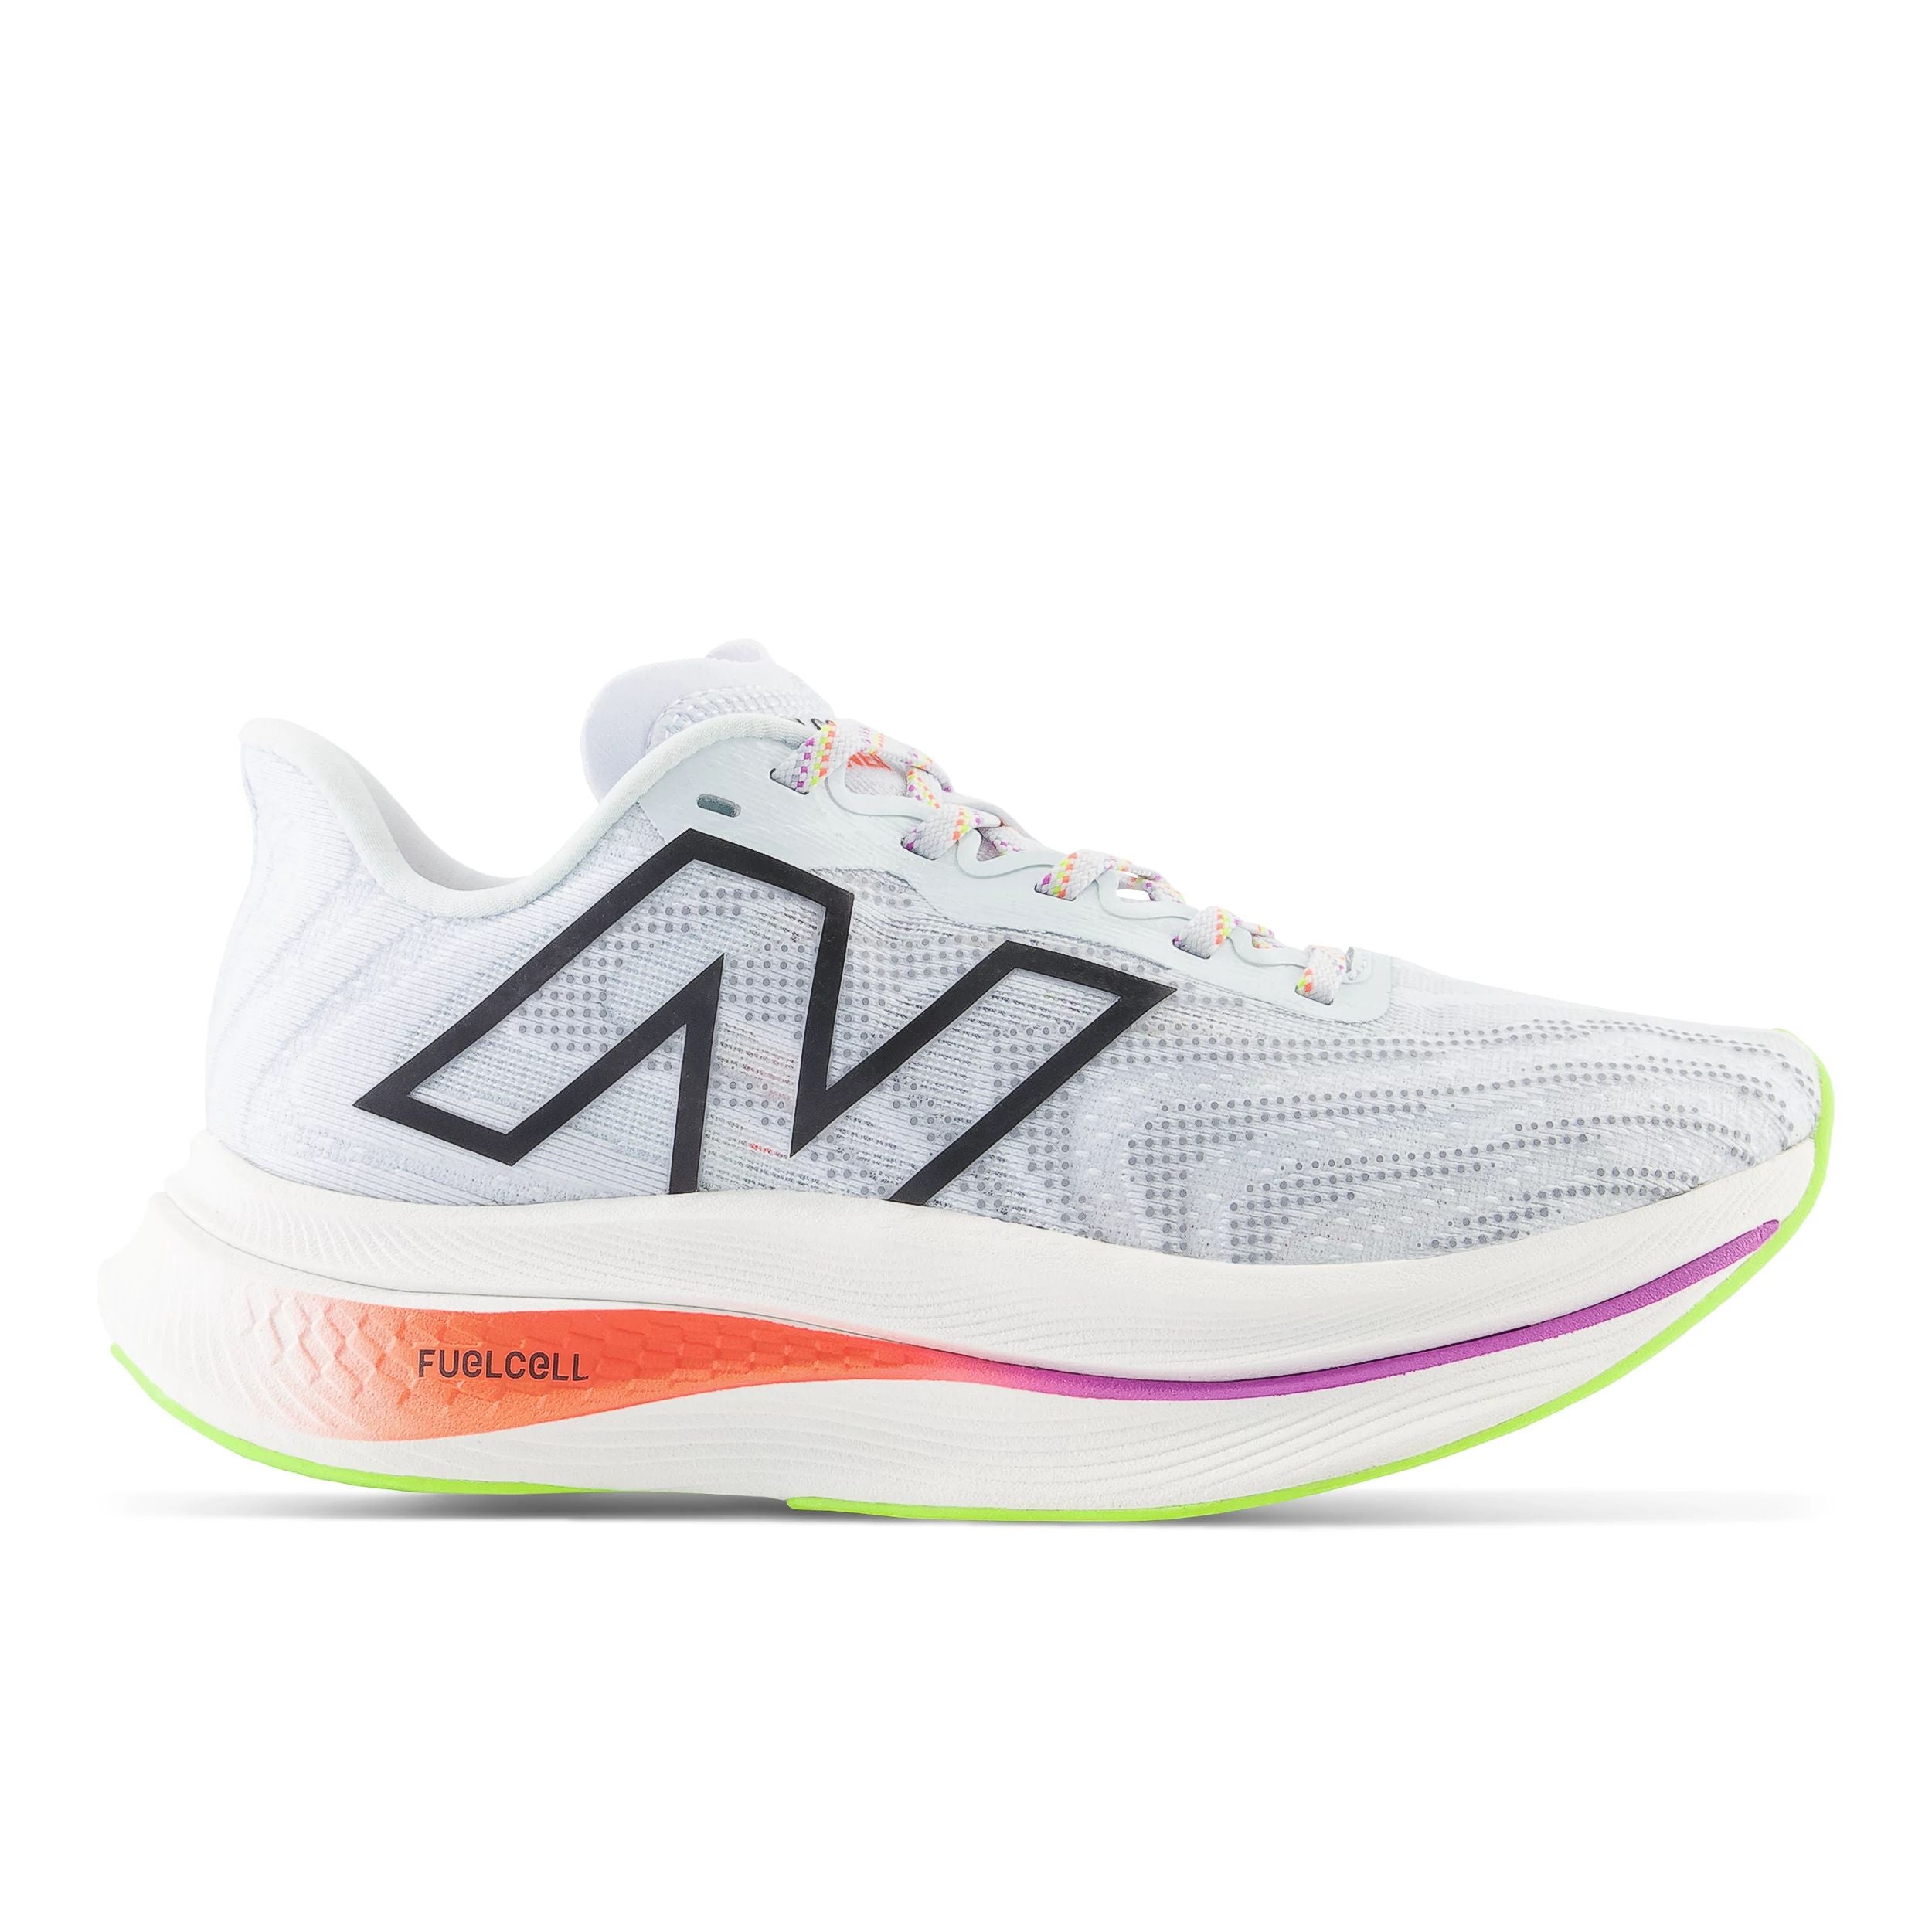 NEW BALANCE WOMEN'S FUELCELL SUPERCOMP TRAINER V2 5.0